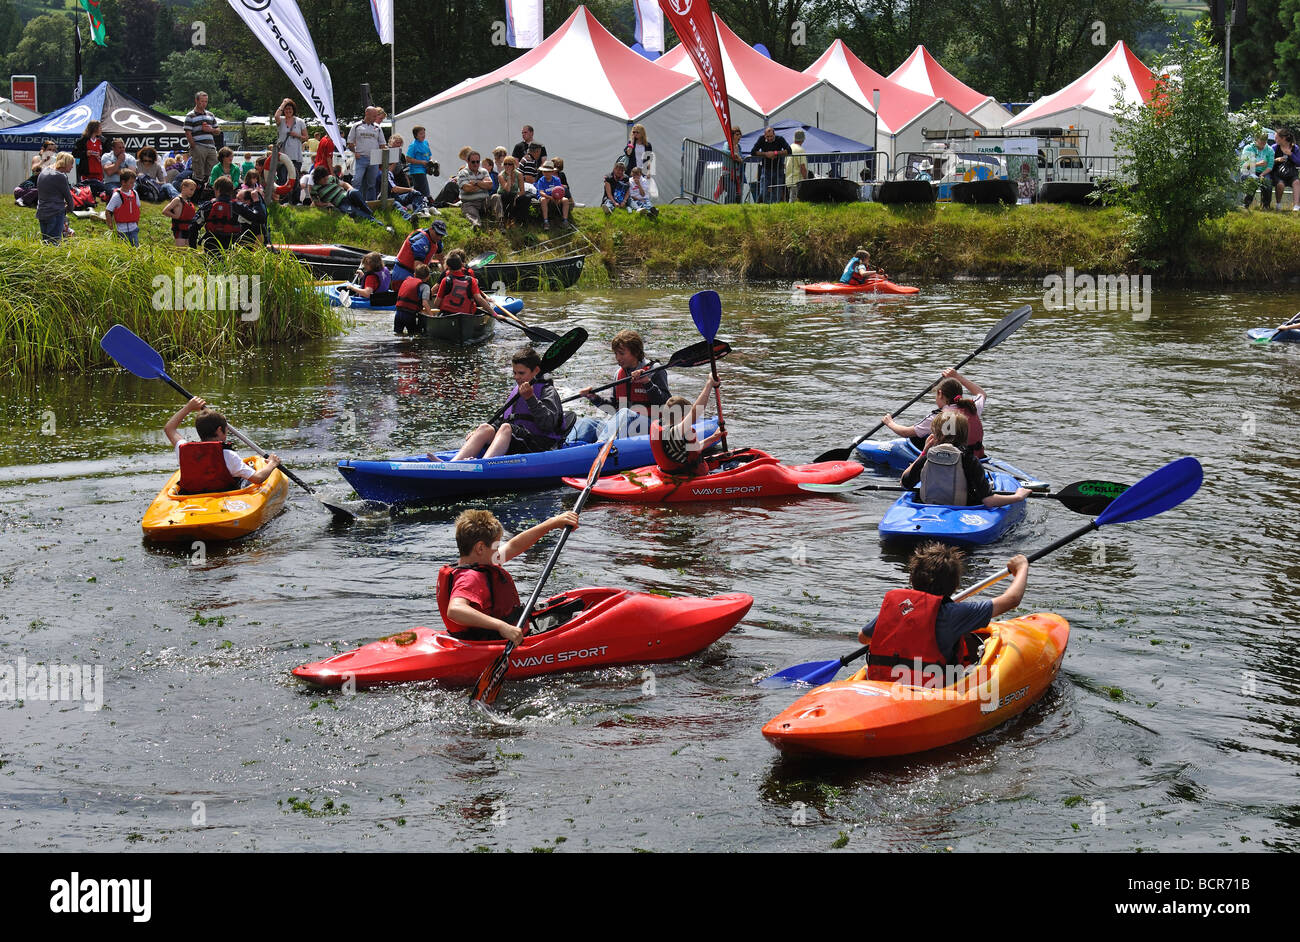 Children in kayaks at the Royal Welsh Show, Builth Wells, Powys, Wales, UK Stock Photo